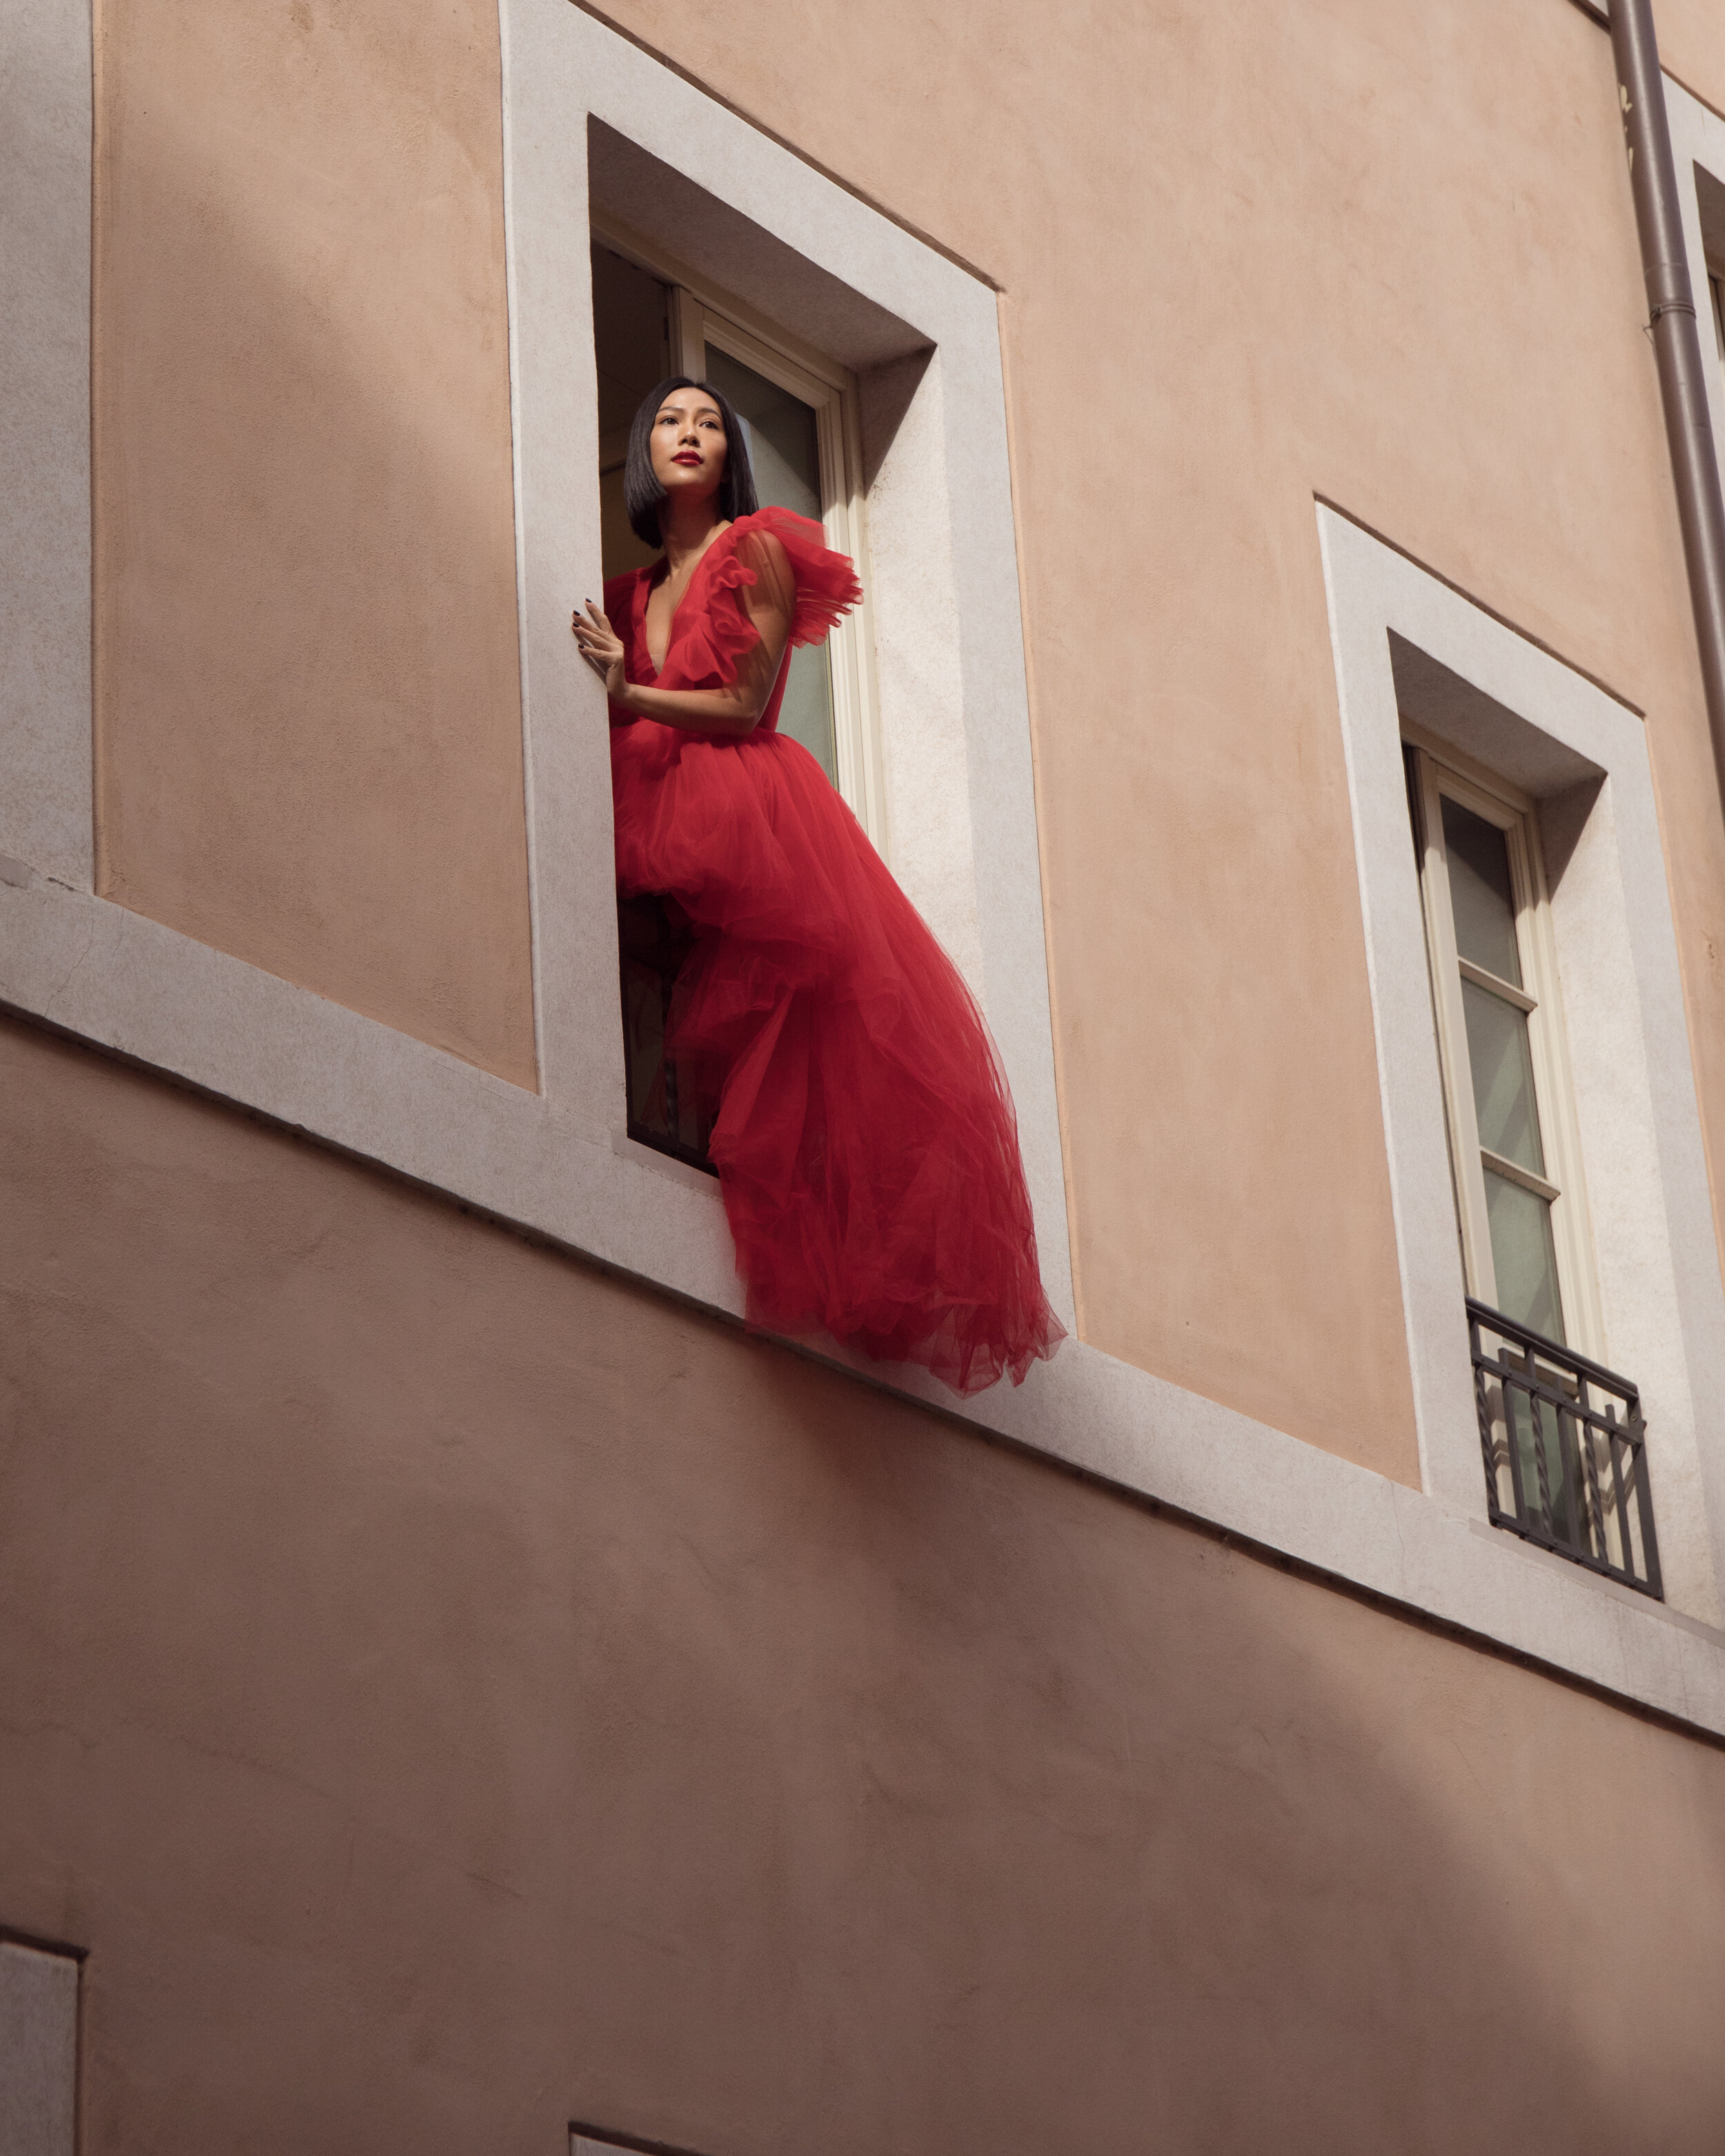 Molly Chiang for H&amp;M x Giambattista Valli .Oct 2019. Rome Italy